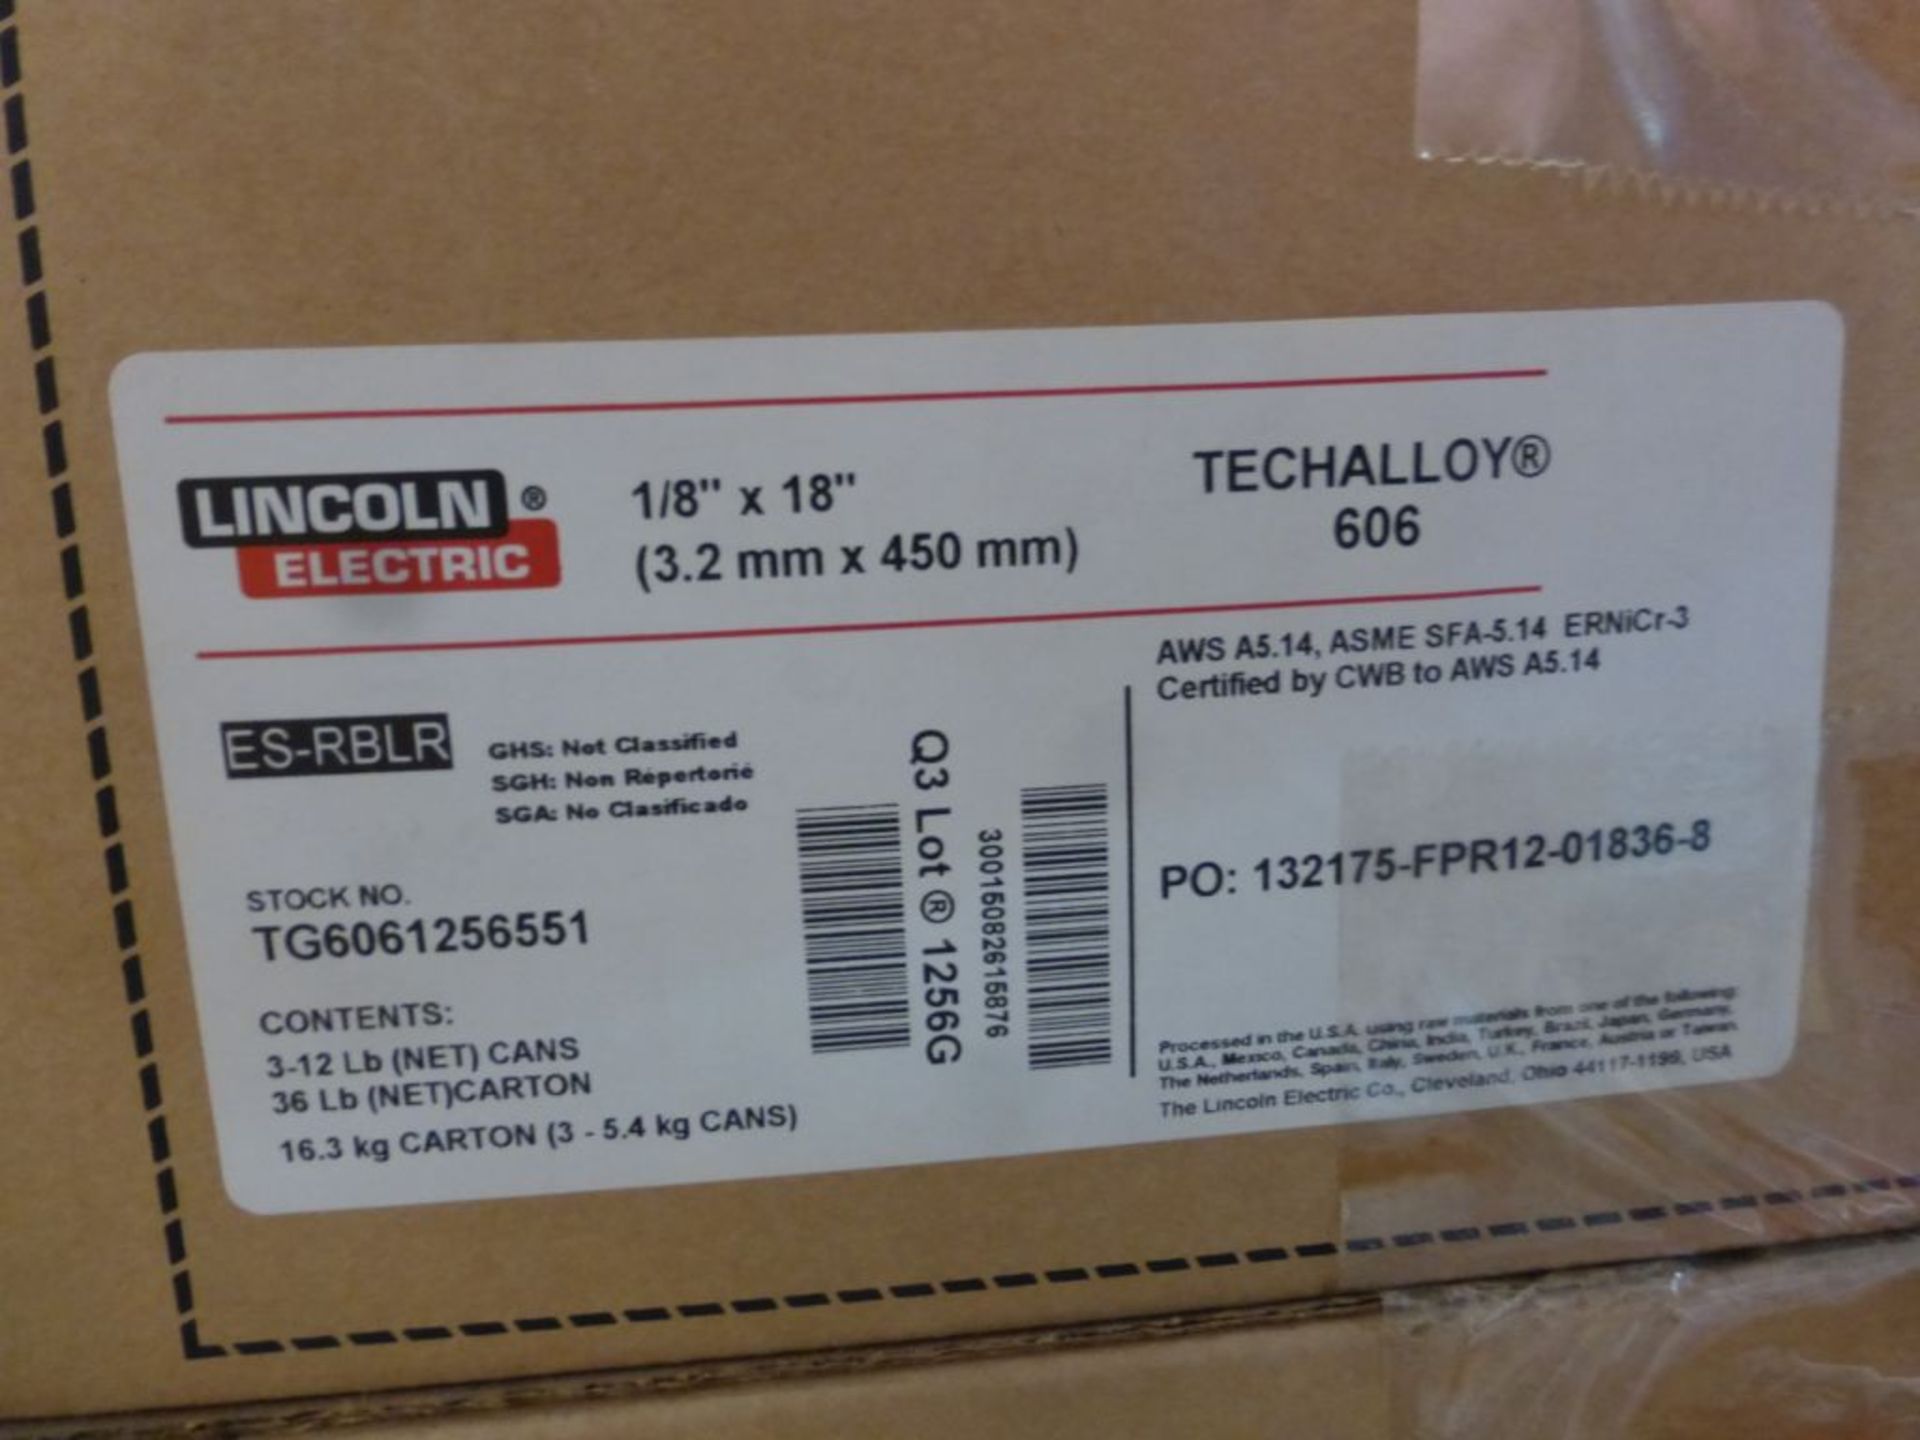 Lot of (8) Boxes of Lincoln Electric Techalloy 606 Welding Wire | Stock No. TG6061256551; 1/8" x - Image 8 of 8